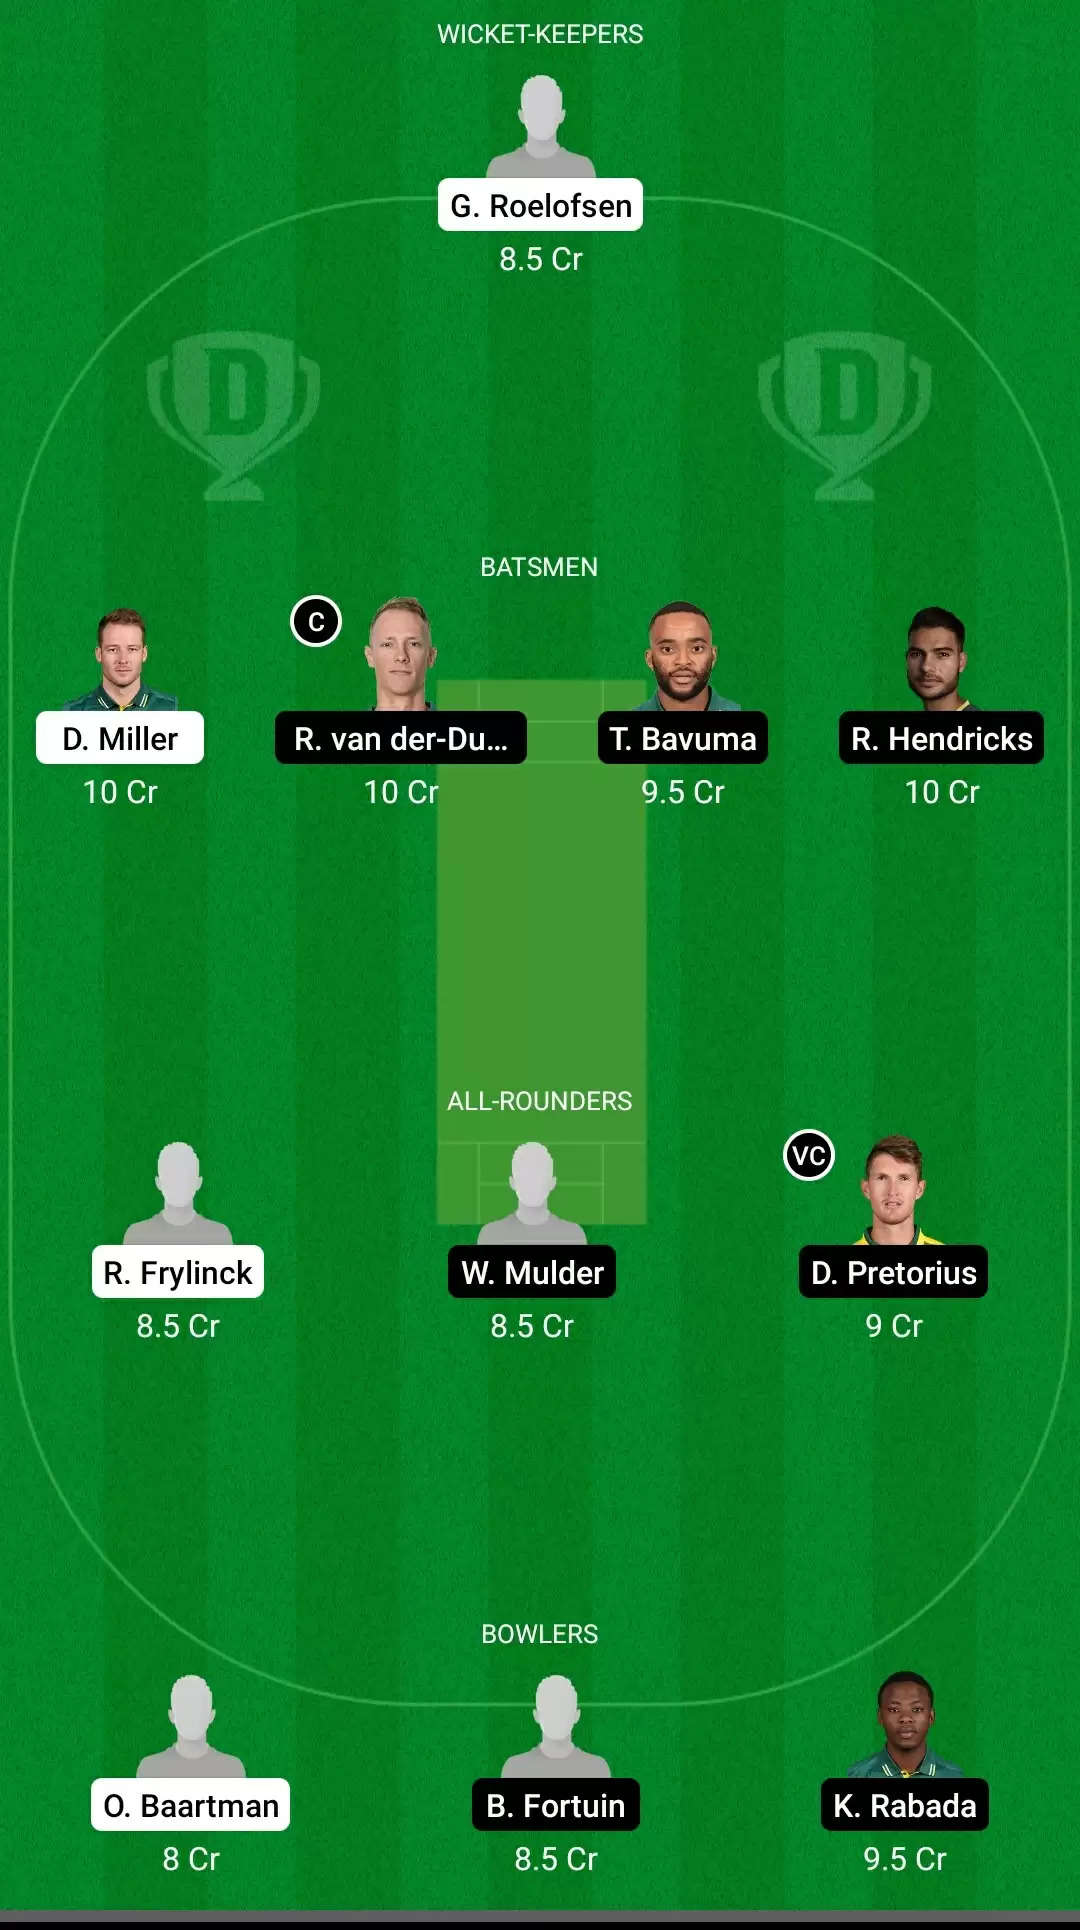 CSA T20 Challenge, 2021 | DOL vs HL Dream11 Prediction: Dolphins vs Highveld Lions Fantasy Cricket Tips, Playing XI, Team & Top Player Picks